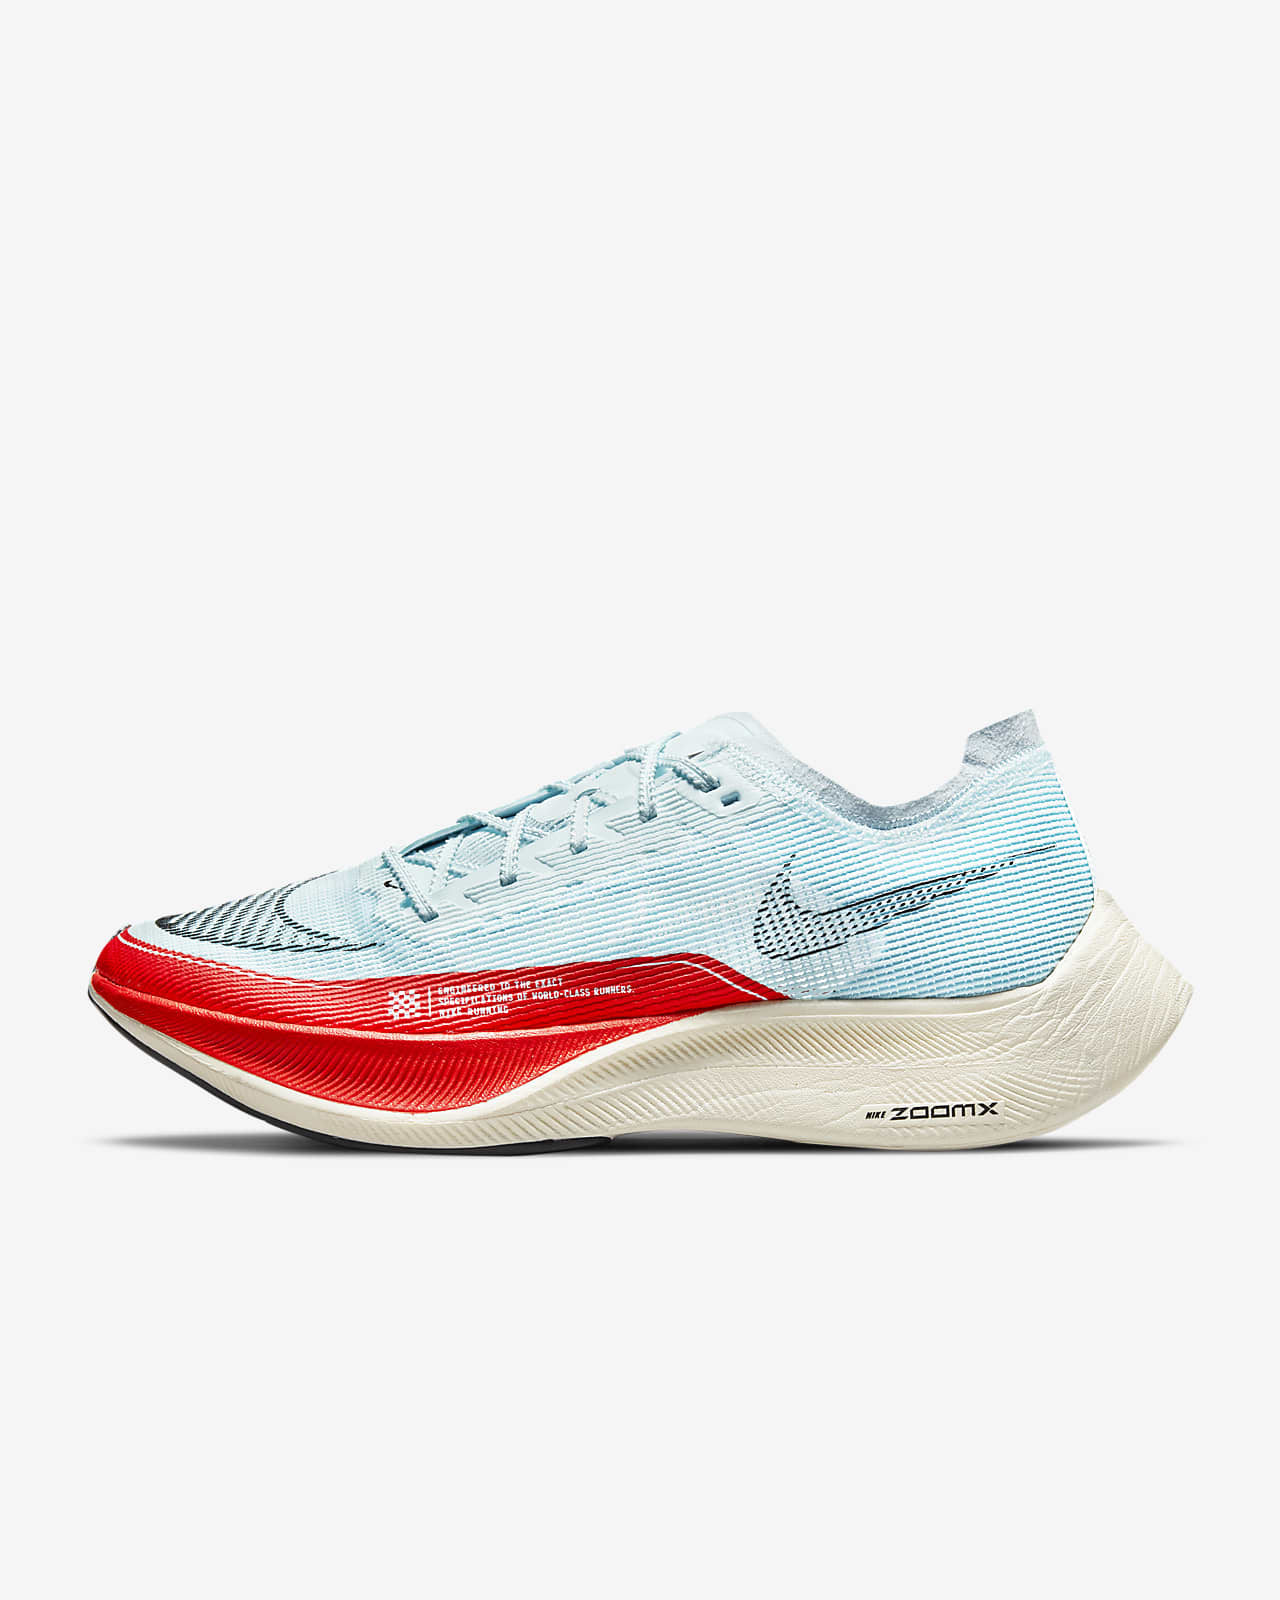 Nike ZoomX Vaporfly NEXT% 2 Men's Road Racing Shoes